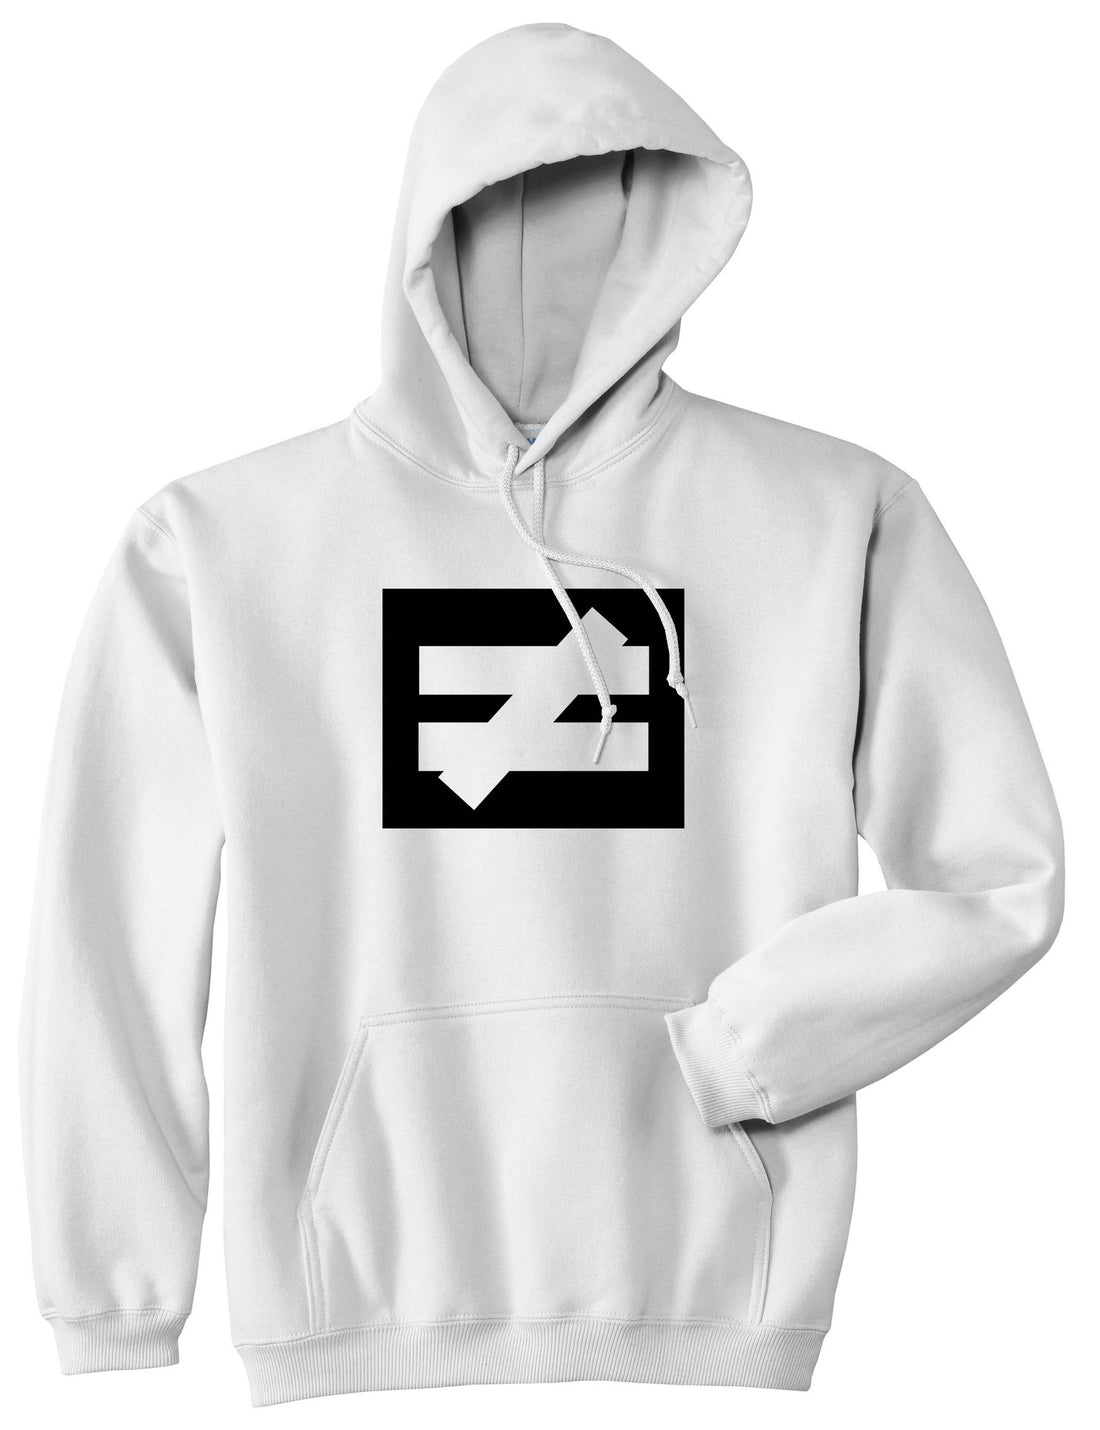 No Equal No Competition Boys Kids Pullover Hoodie Hoody in White by Kings Of NY